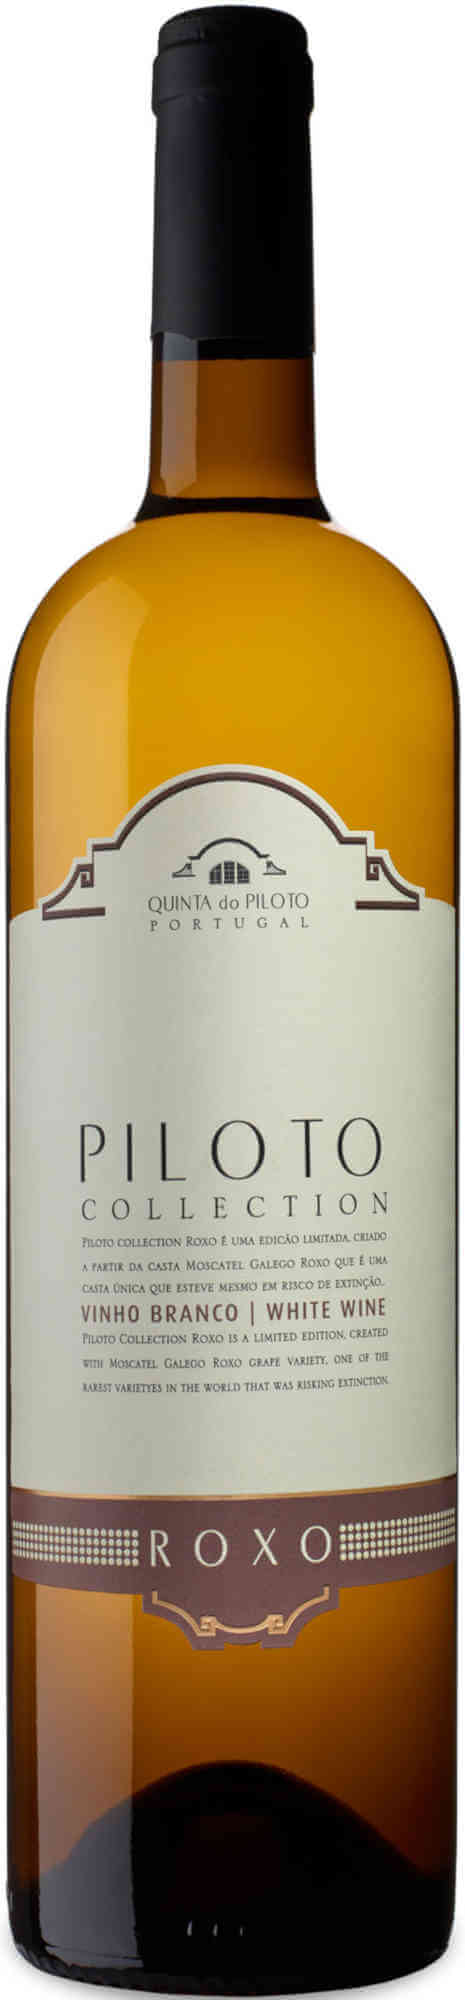 Piloto-Collection-Moscatel-Roxo